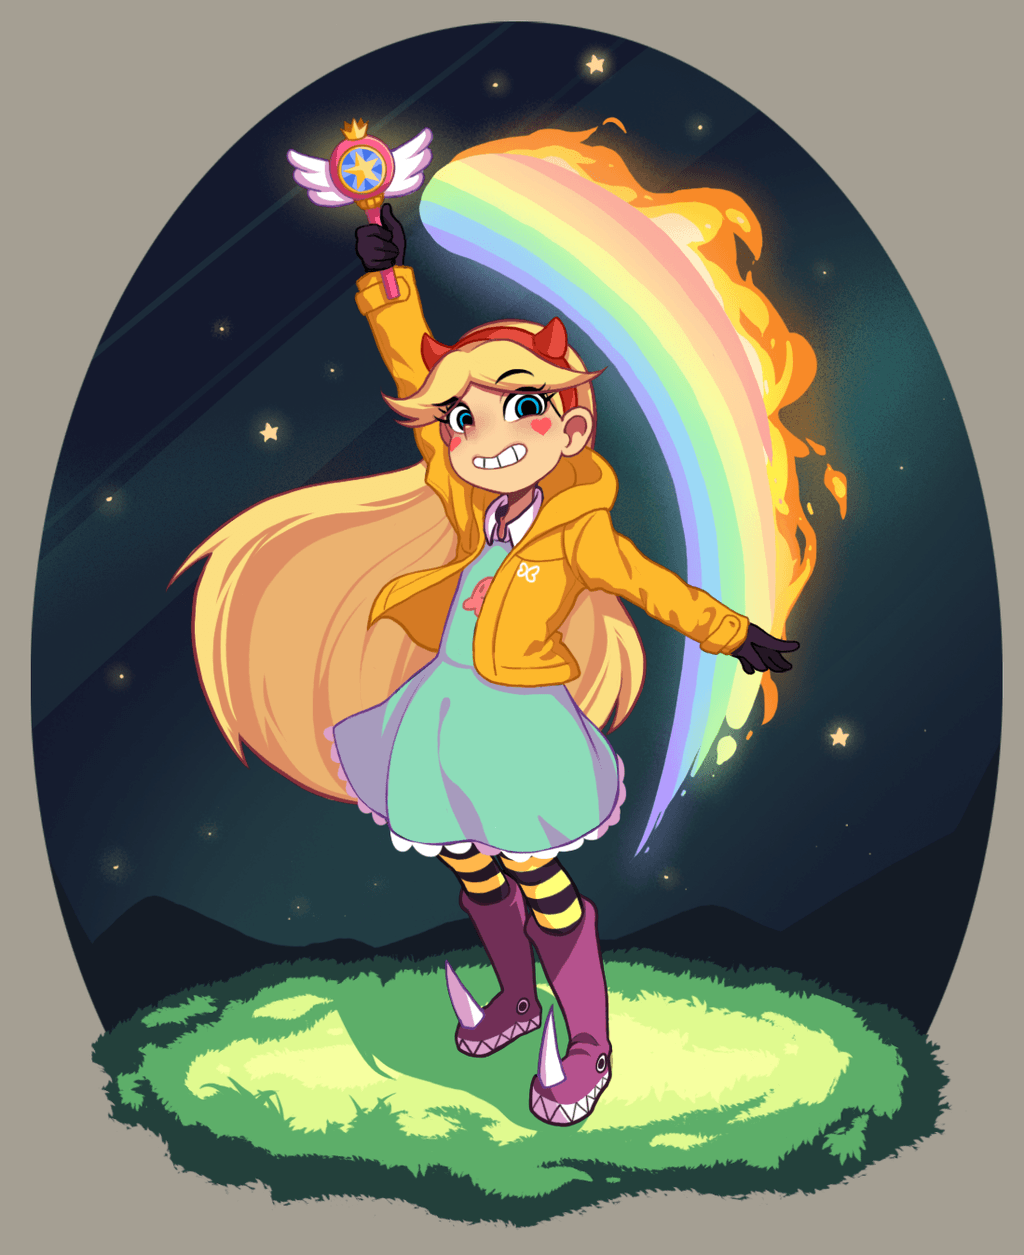 Star vs. the Forces of Evil by eoqudtkdl